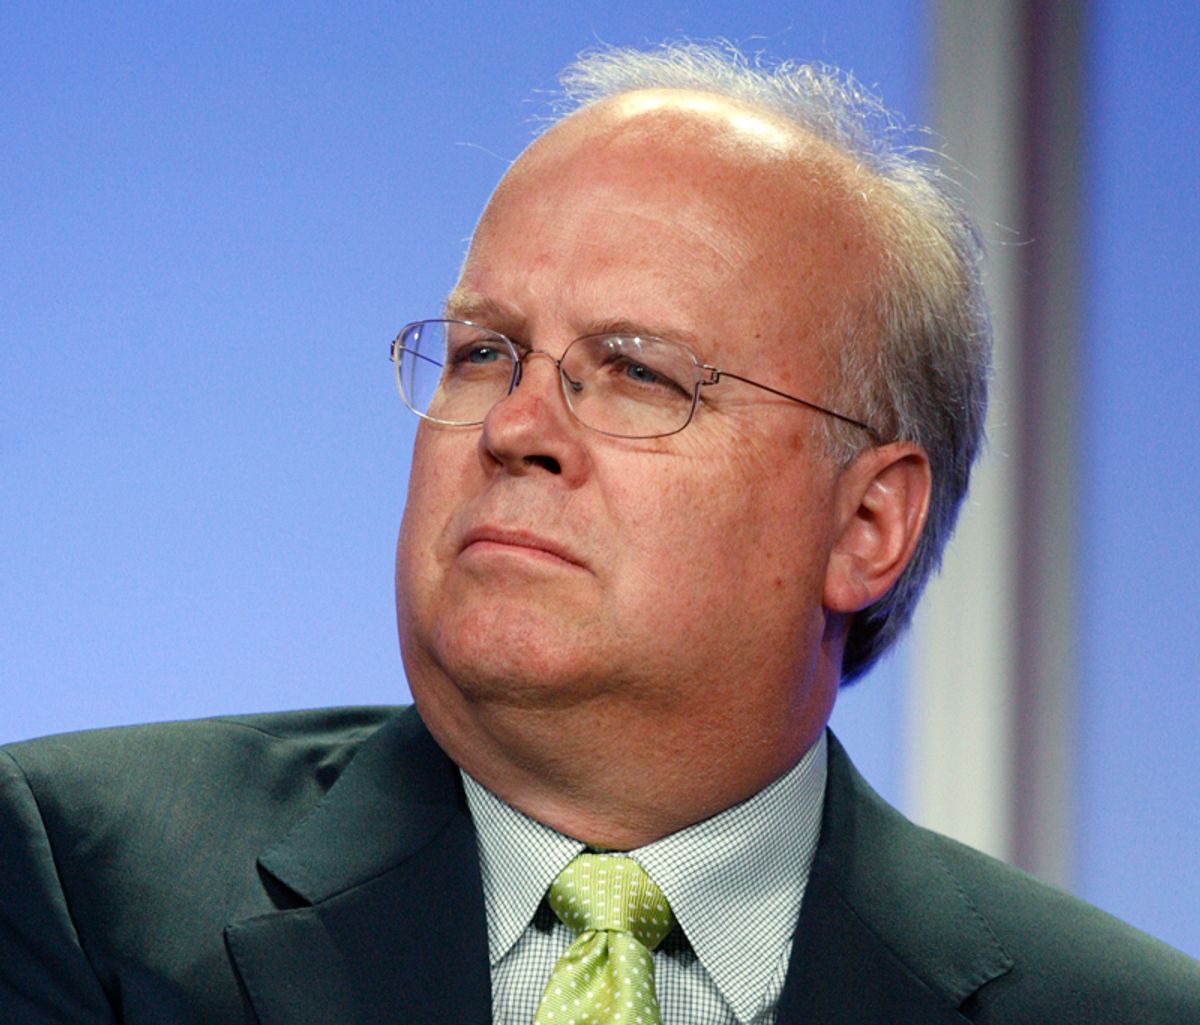 Karl Rove, contributor for Fox News takes part in a panel discussion at the Fox TV network summer press tour in Beverly Hills, California July 14, 2008. Rove was previously U.S. President George W. Bush's closest aide.   REUTERS/Fred Prouser  (UNITED STATES)   (Â© Fred Prouser / Reuters)